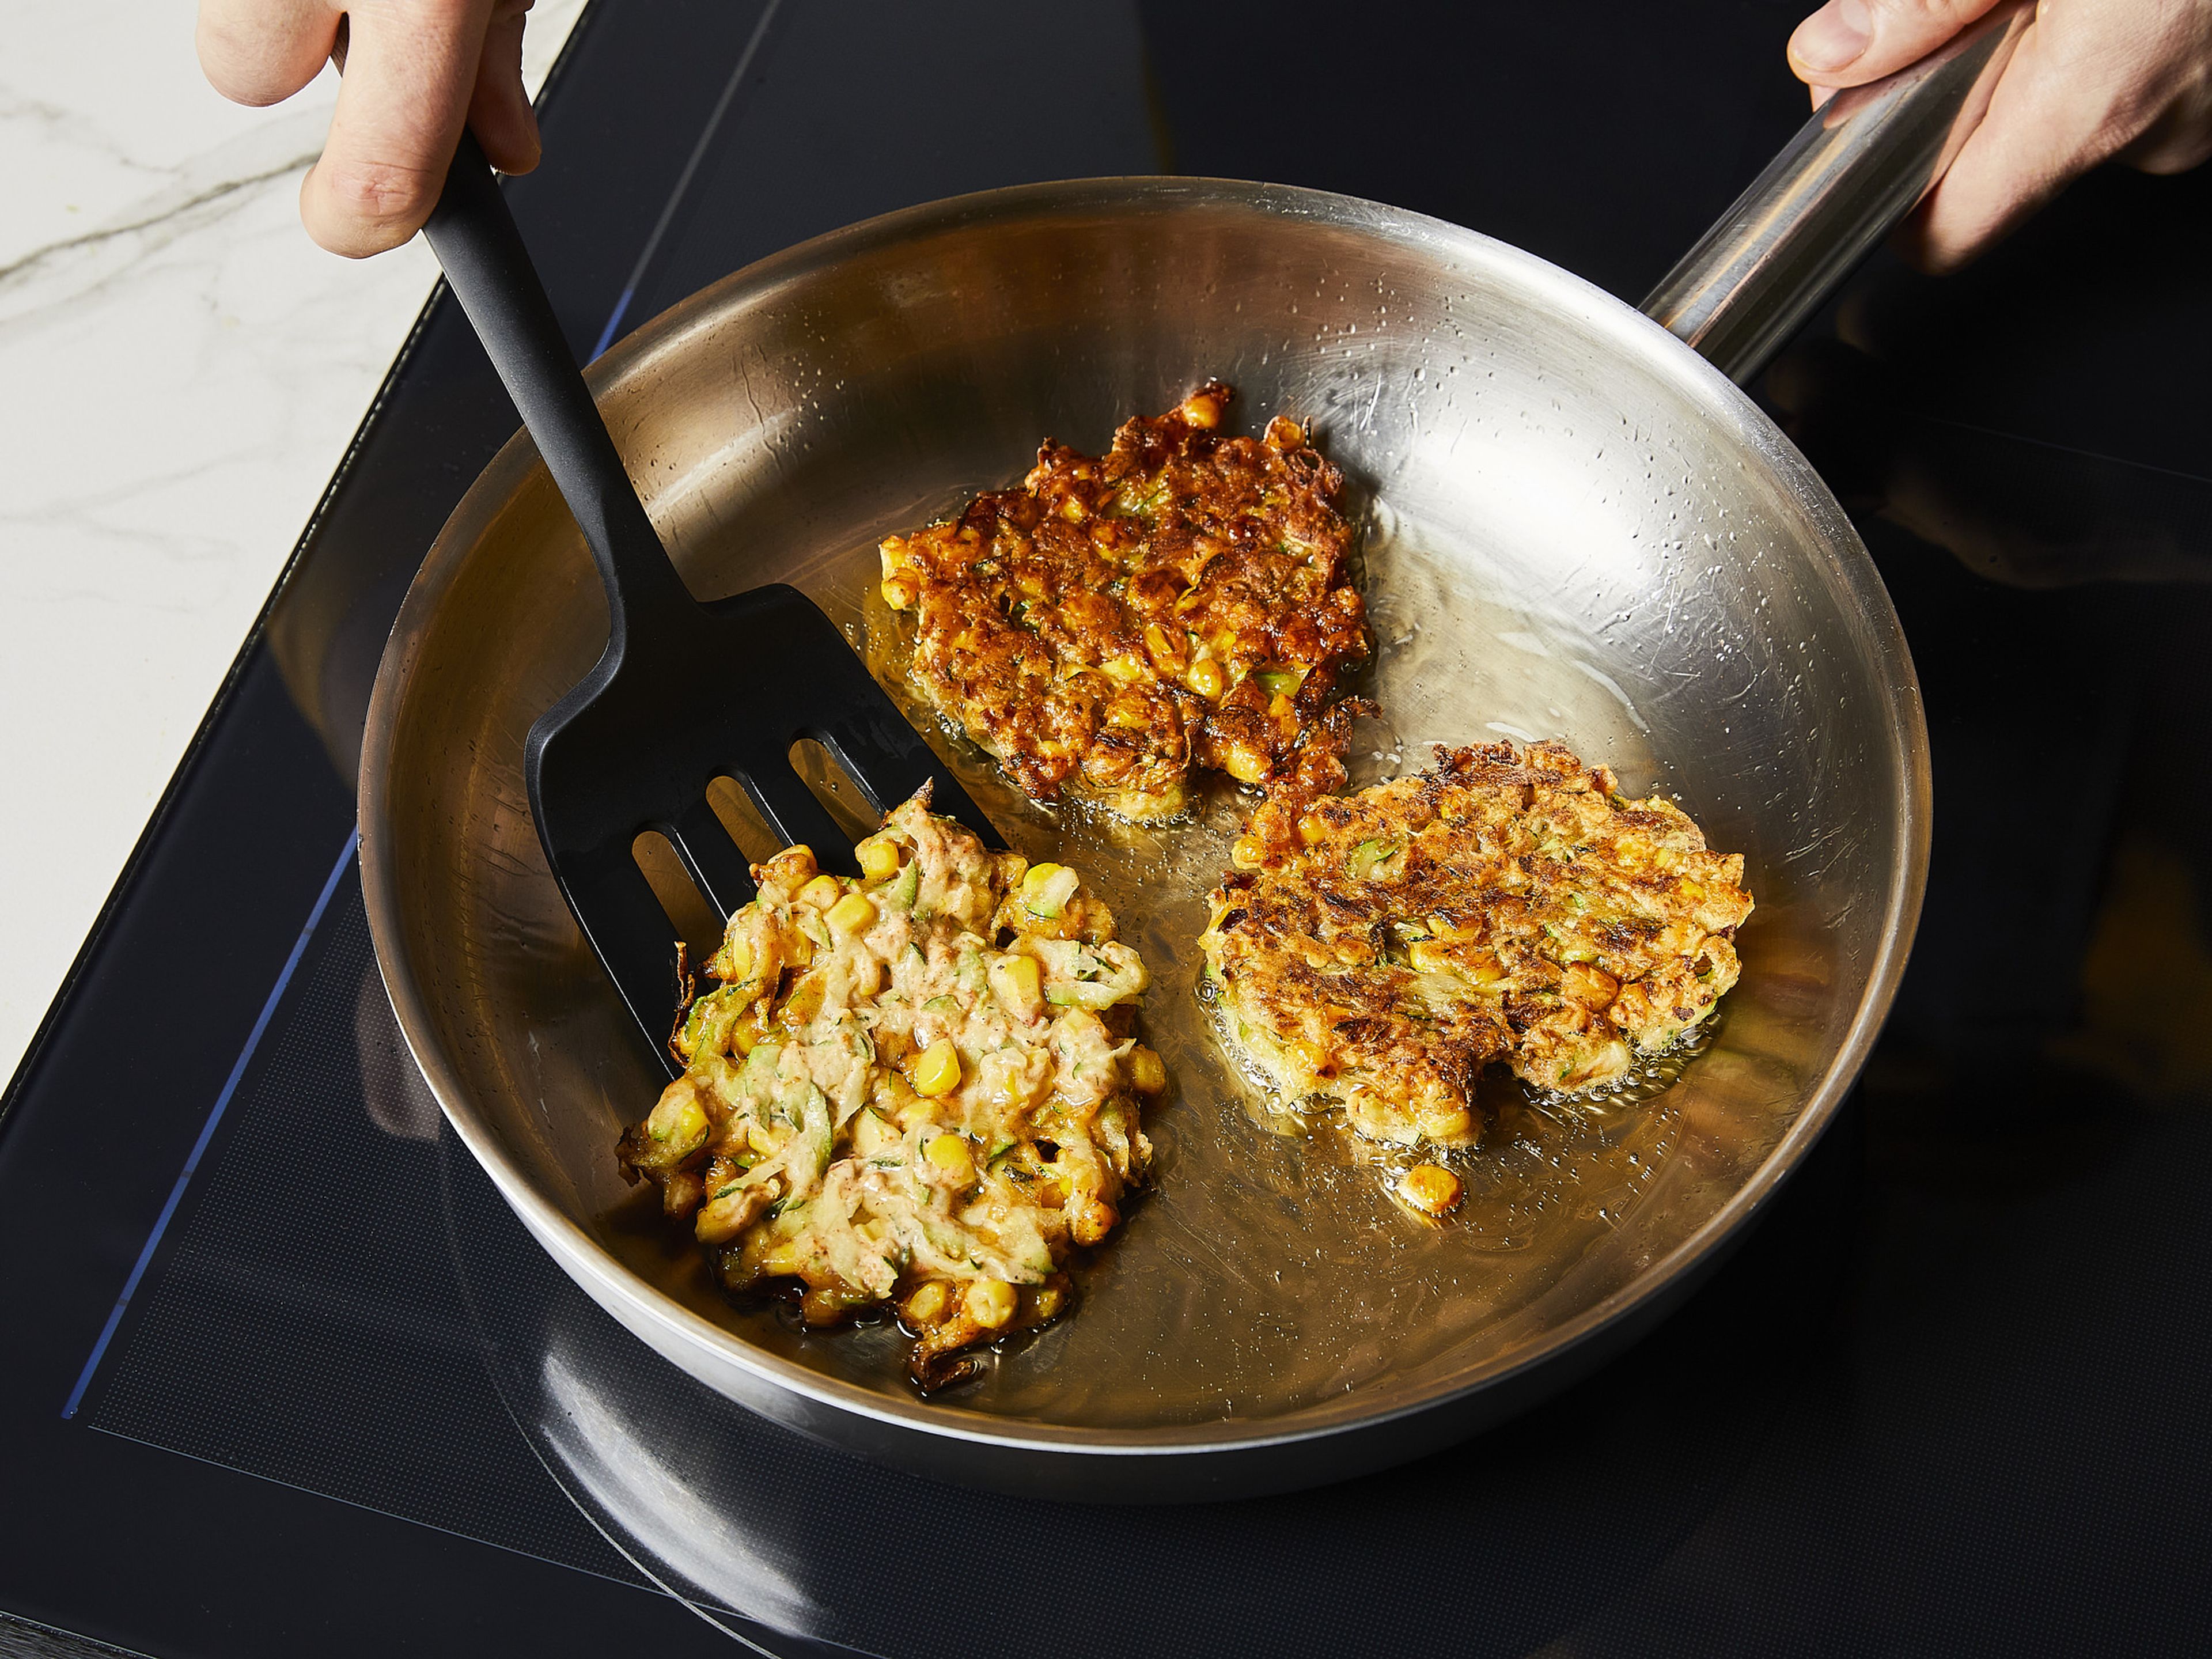 Heat the oil in a frying pan over medium-high heat. Spoon in approx. 1 tbsp of the batter and flatten slightly. Fry for approx. 4–6 min. then flip and fry the other side until golden brown and the edges are nice and crispy. Serve immediately and enjoy with the dip.